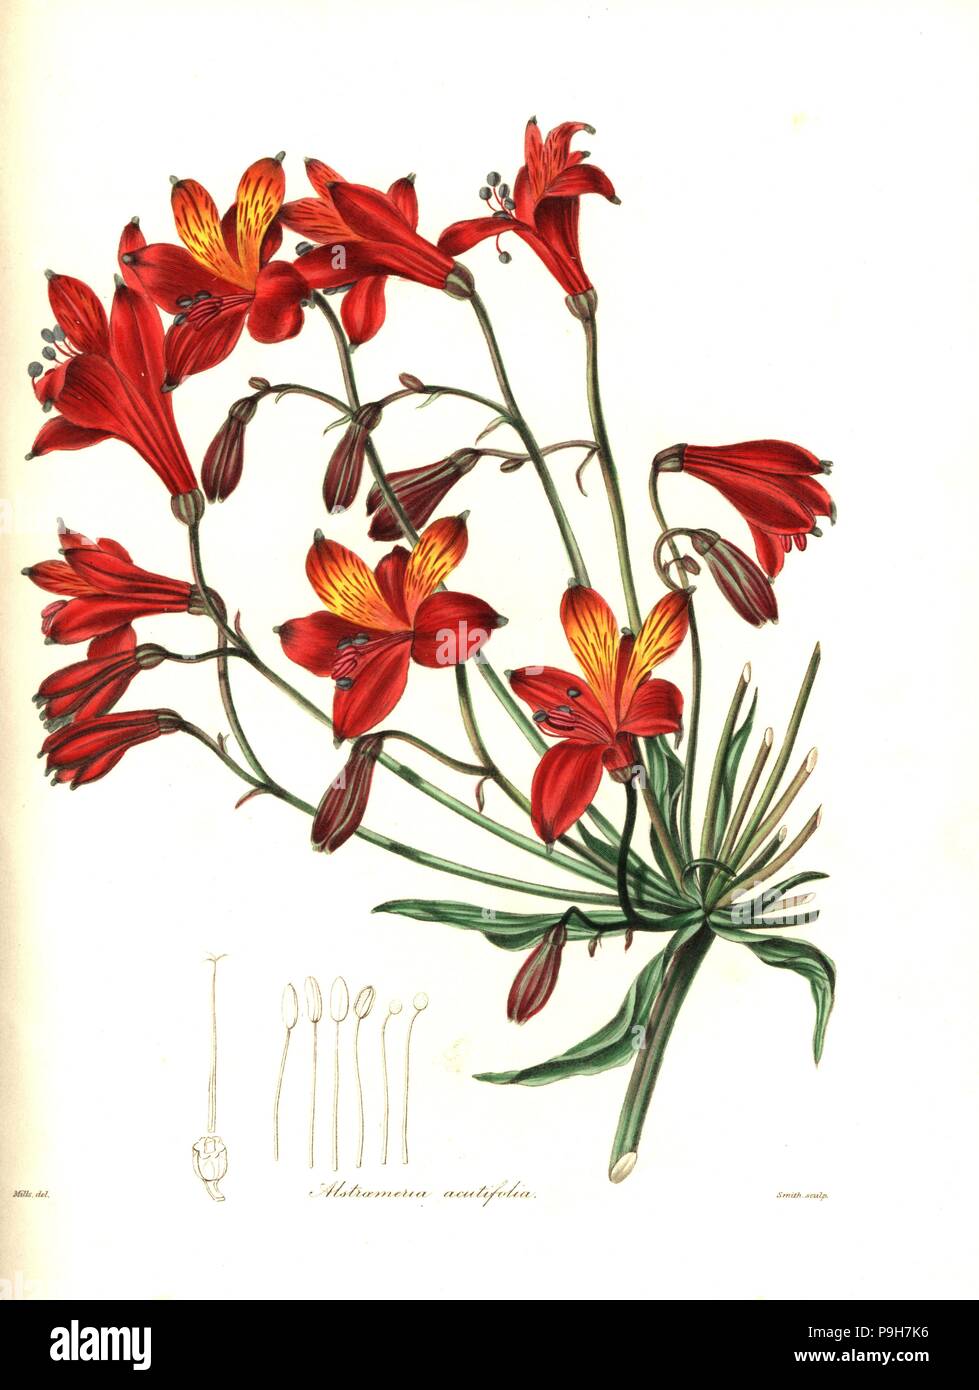 Bomarea acutifolia (Sharp-leaved alstroemeria, Alstroemeria acutifolia). Handcoloured copperplate engraving by Smith after a botanical illustration by MIlls from Benjamin Maund and the Rev. John Stevens Henslow's The Botanist, London, 1836. Stock Photo